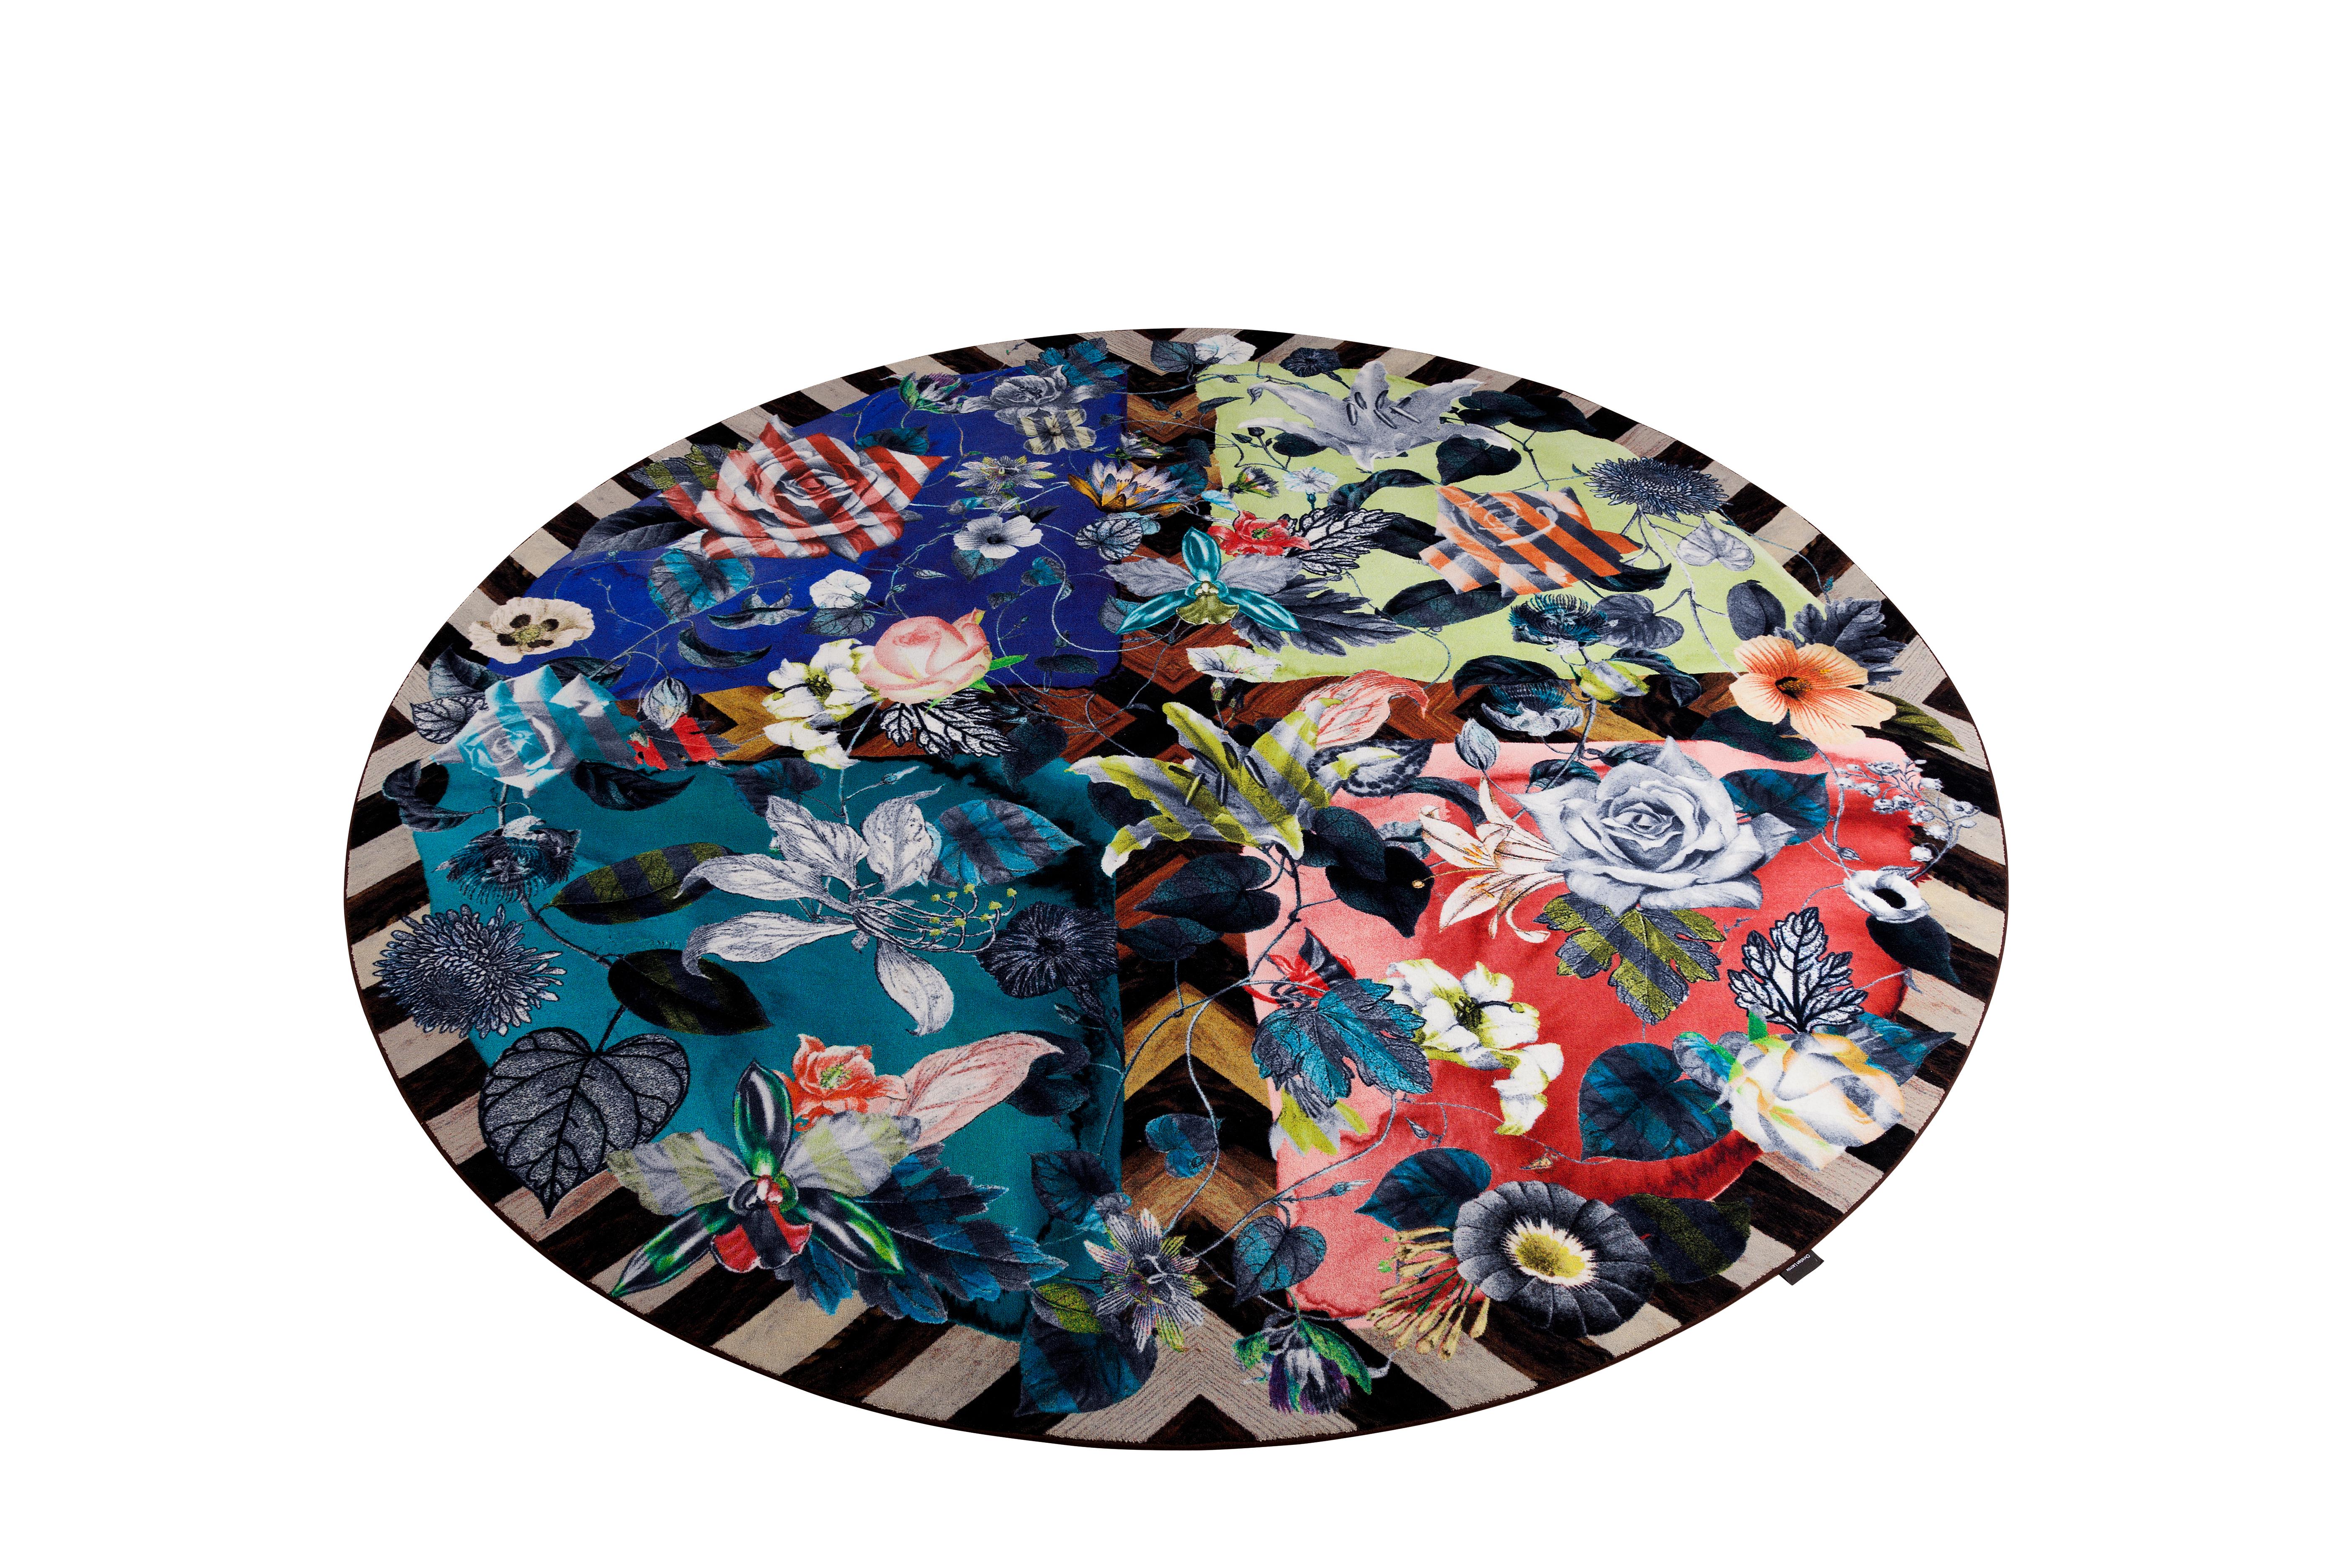 Moooi large guimauve rug in soft yarn polyamide by Christian Lacroix Maison.

Since the launch of the Couture House in 1987, the Christian Lacroix style has been unique, exuberant, colorful and baroque. Today, Christian Lacroix Maison expresses